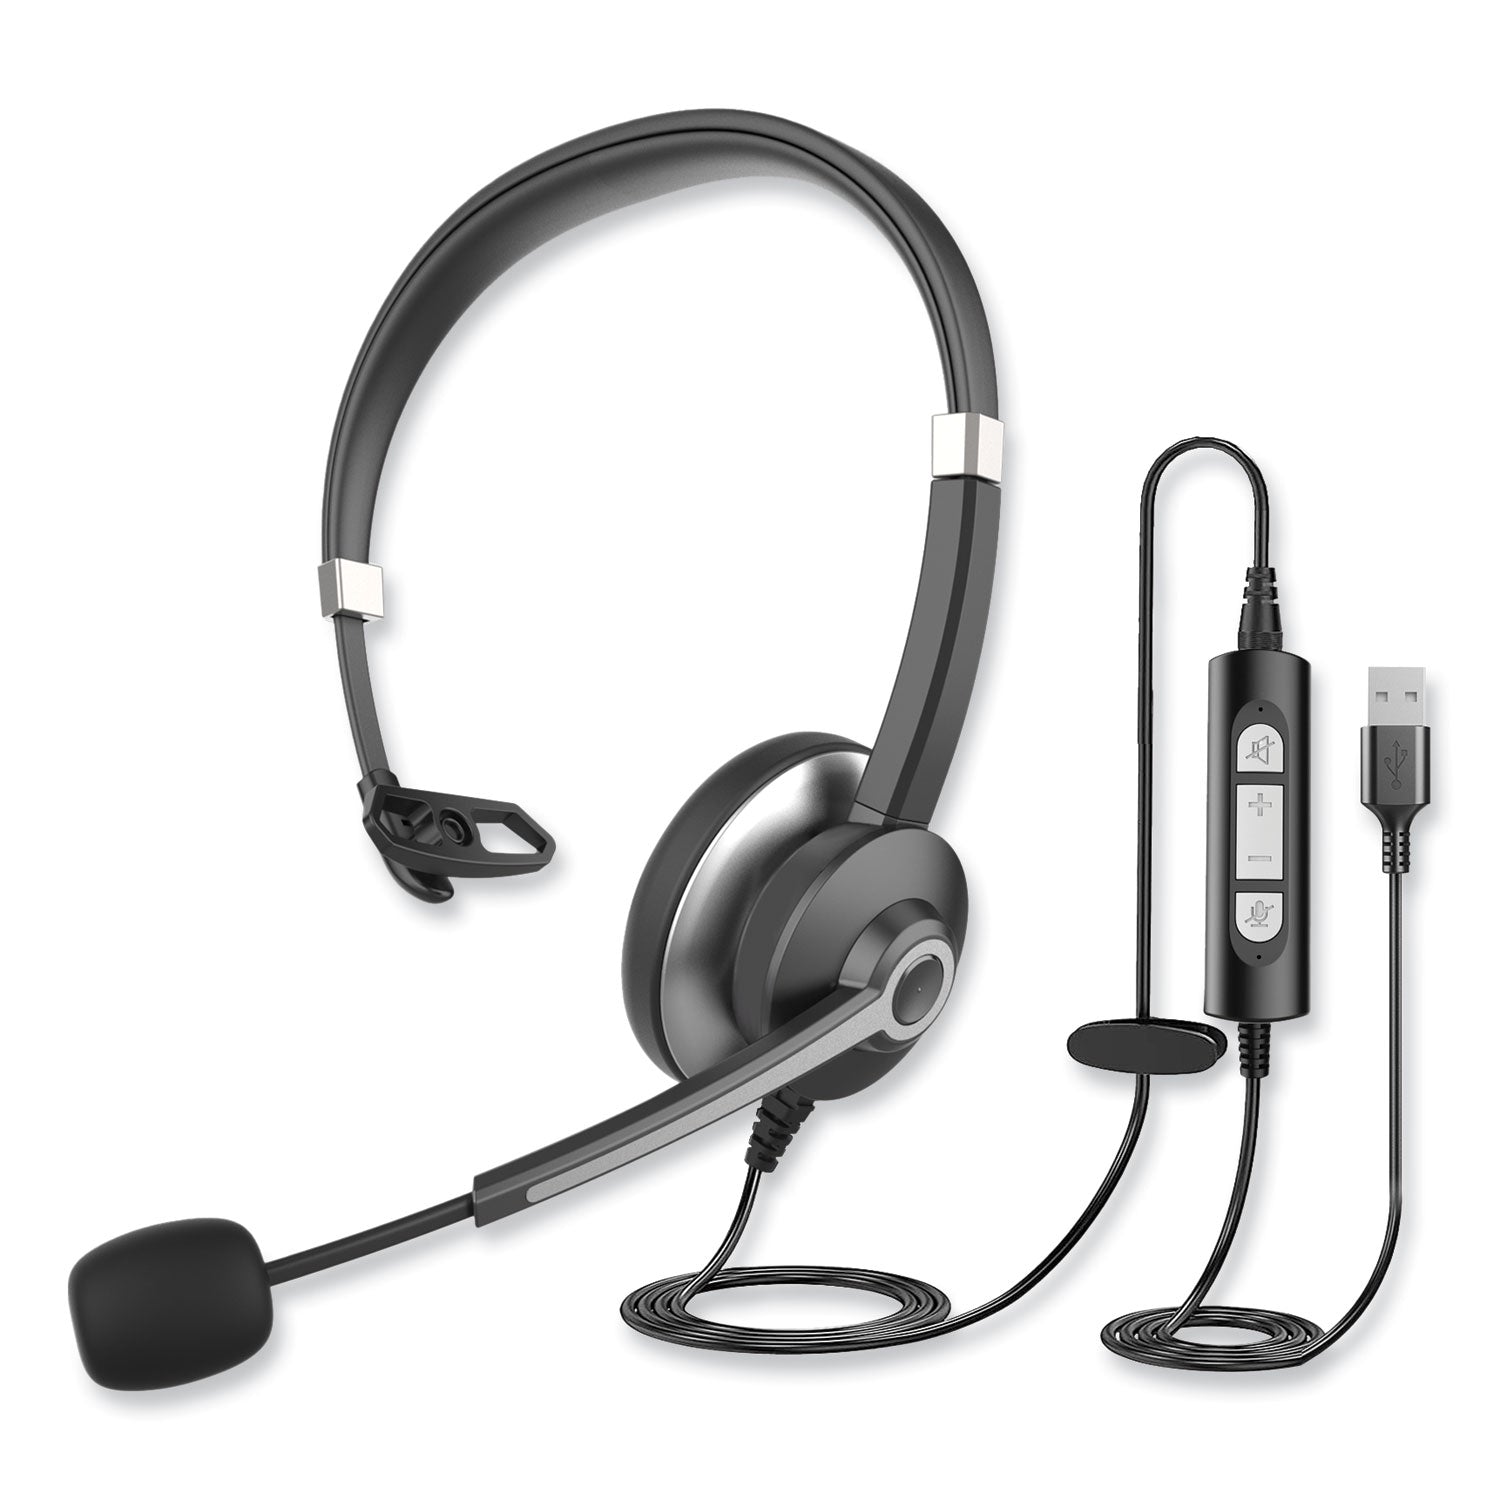 ivr70001-monaural-over-the-head-headset-black-silver_ivr70001 - 1